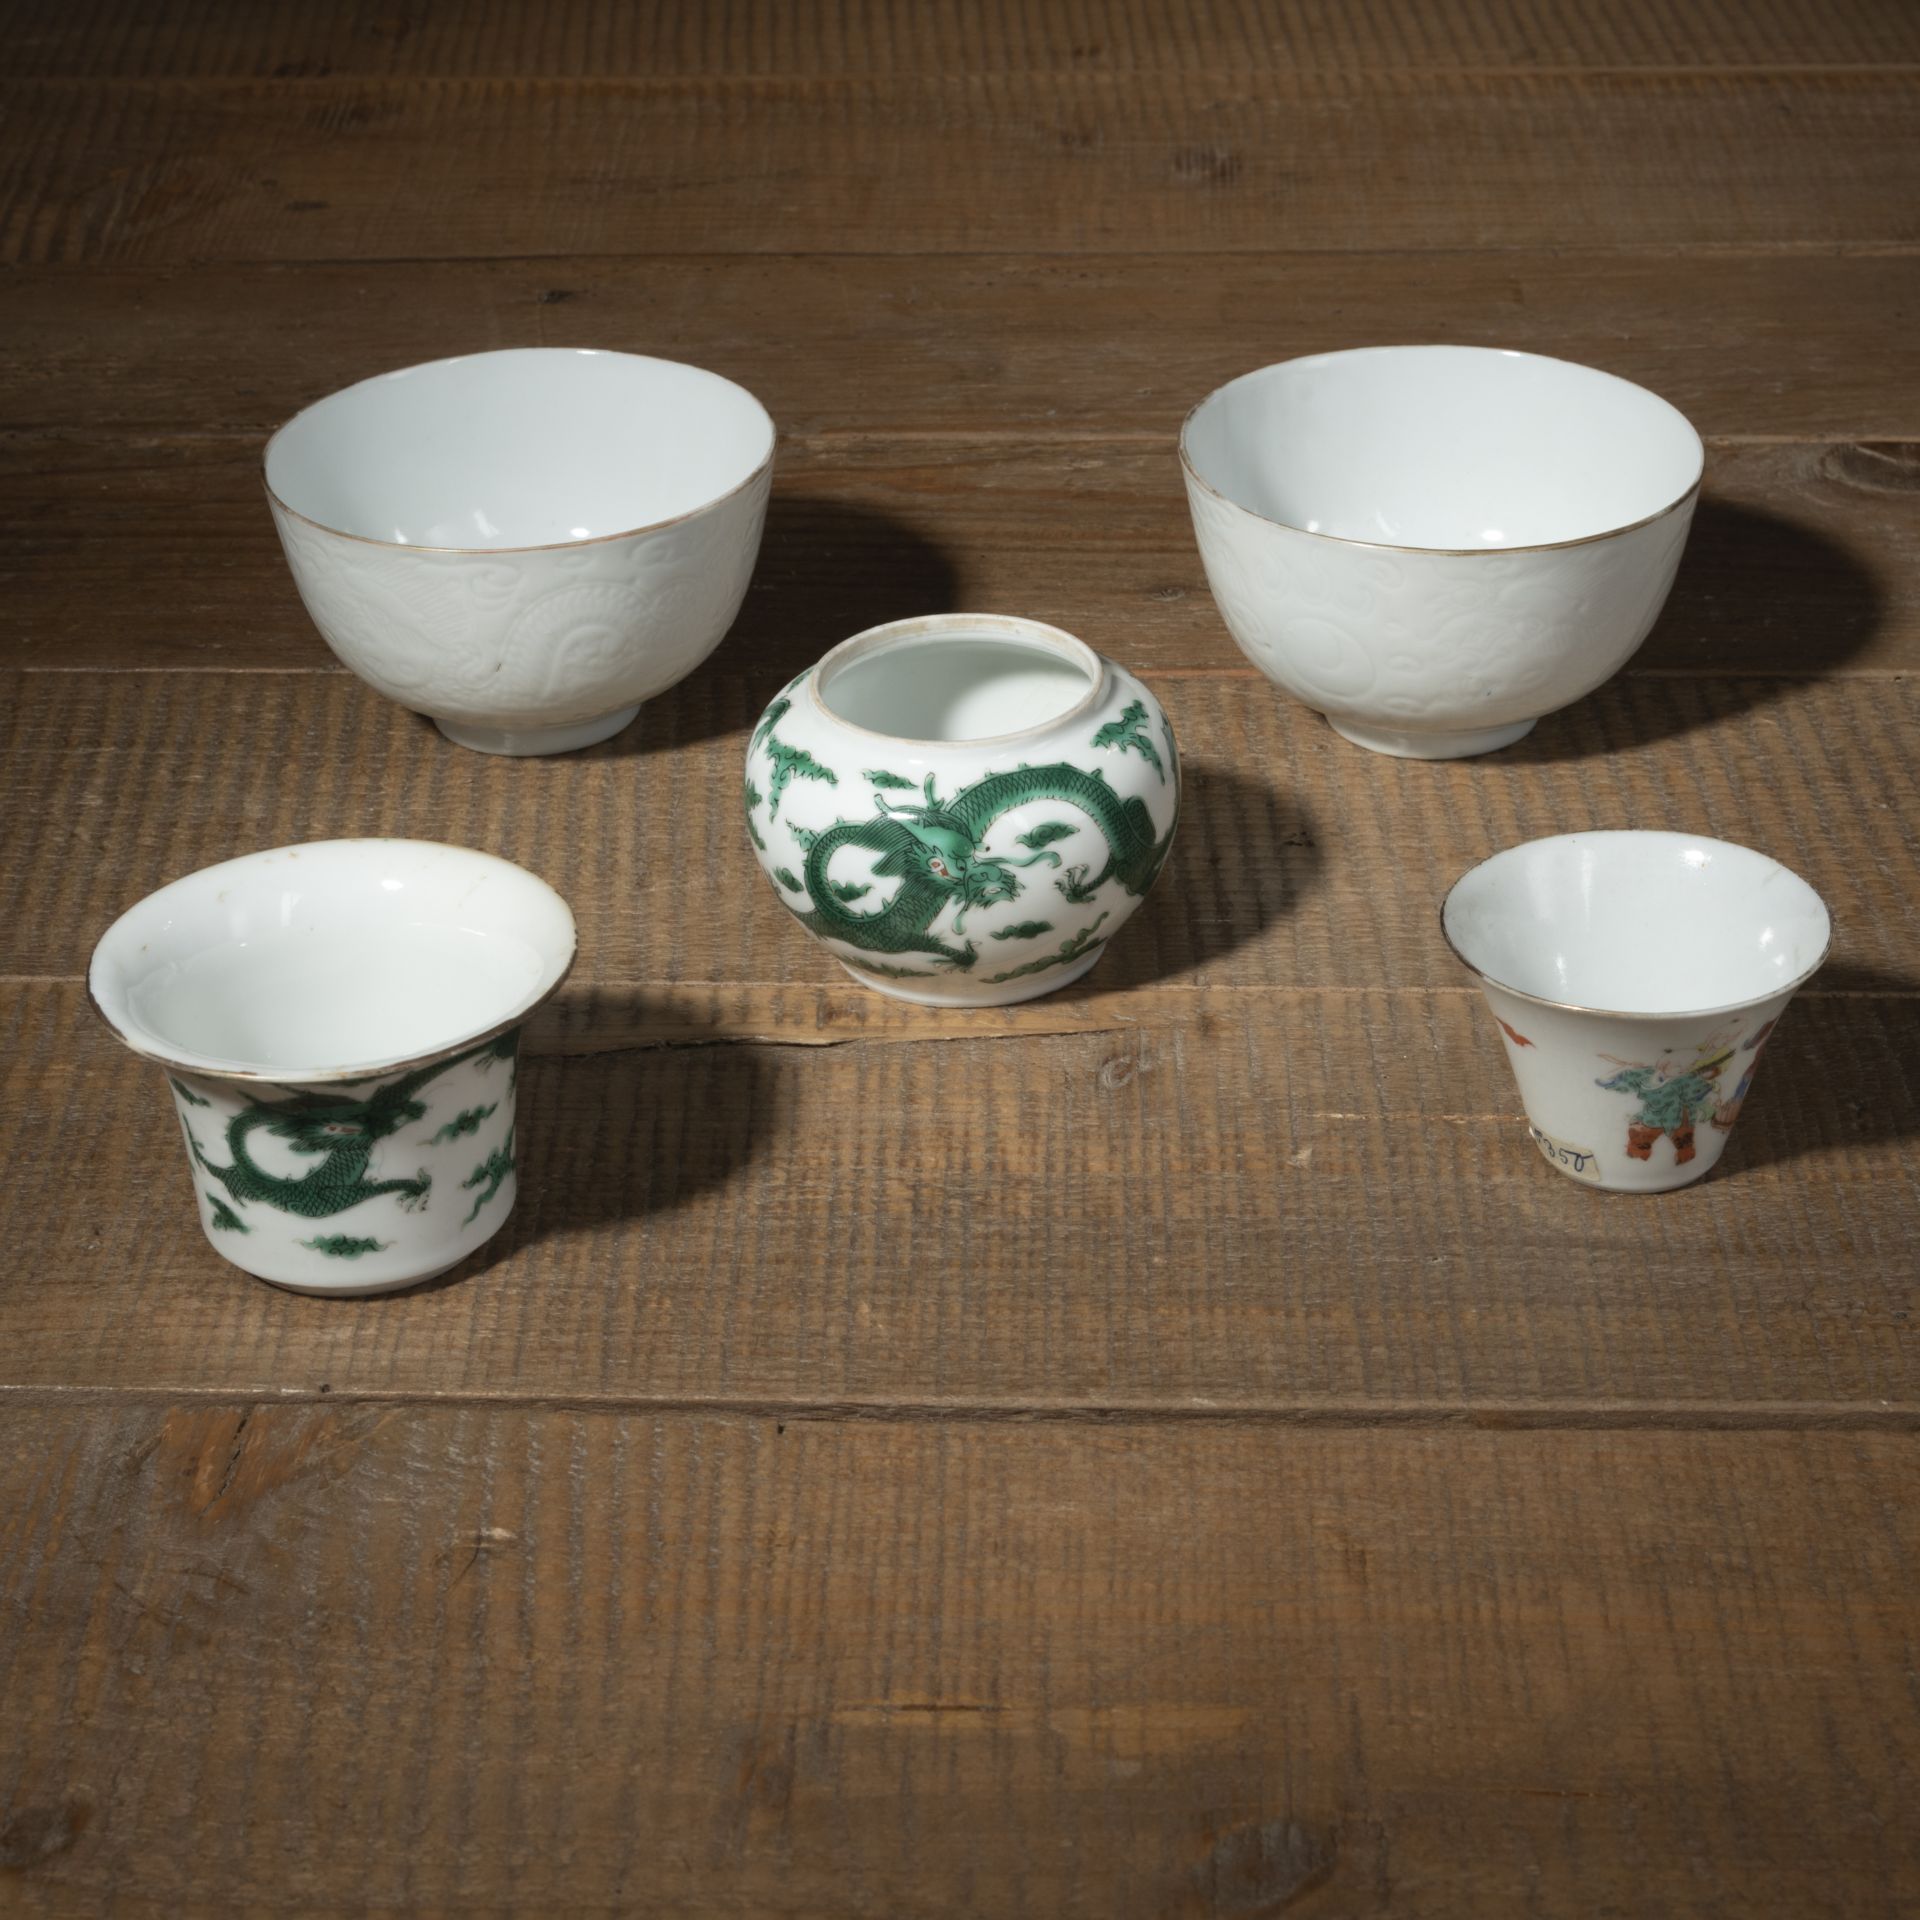 A PAIR OF DRAGON-INCISED PORCELAIN BOWLS, A TWO-PART SPITTOON, AND SMALL CUP